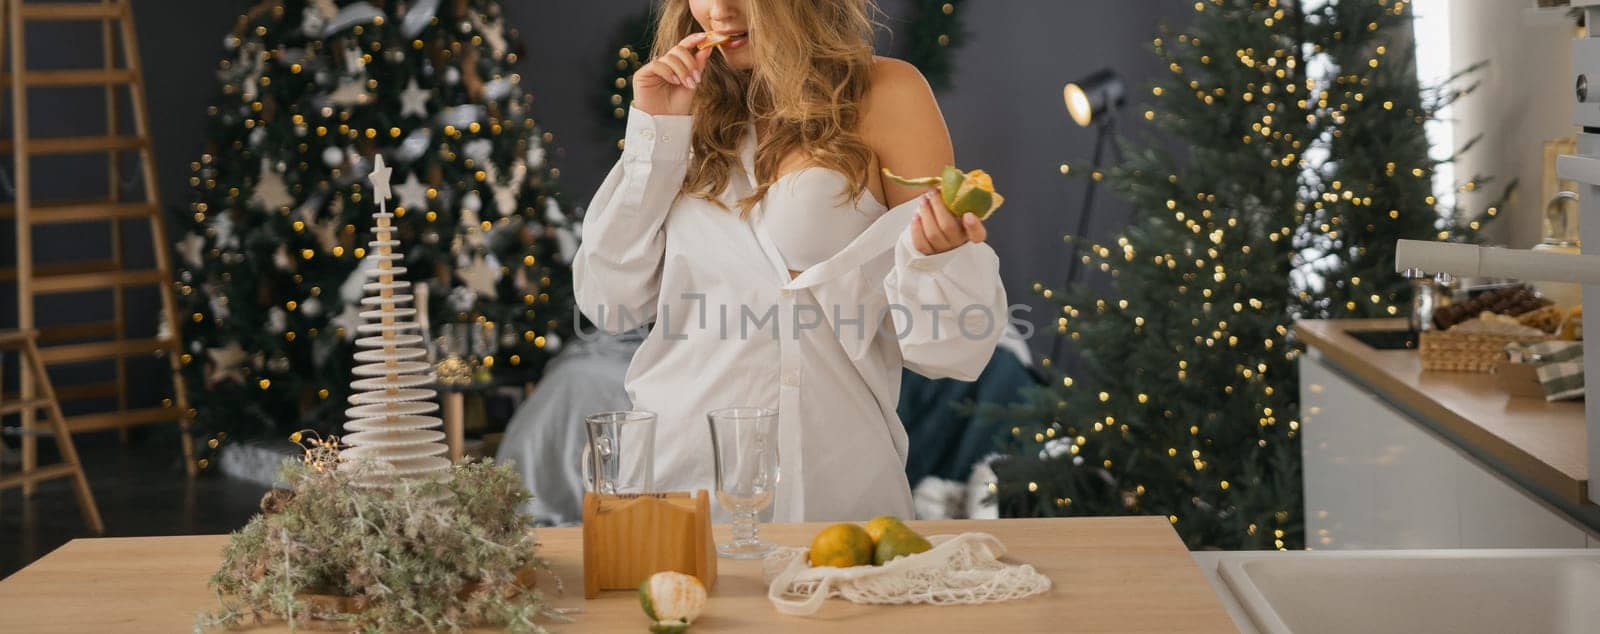 Woman Kitchen Christmas decor in white shirt, peeling tangerines. Illustrating New Year's mood holiday preparations.